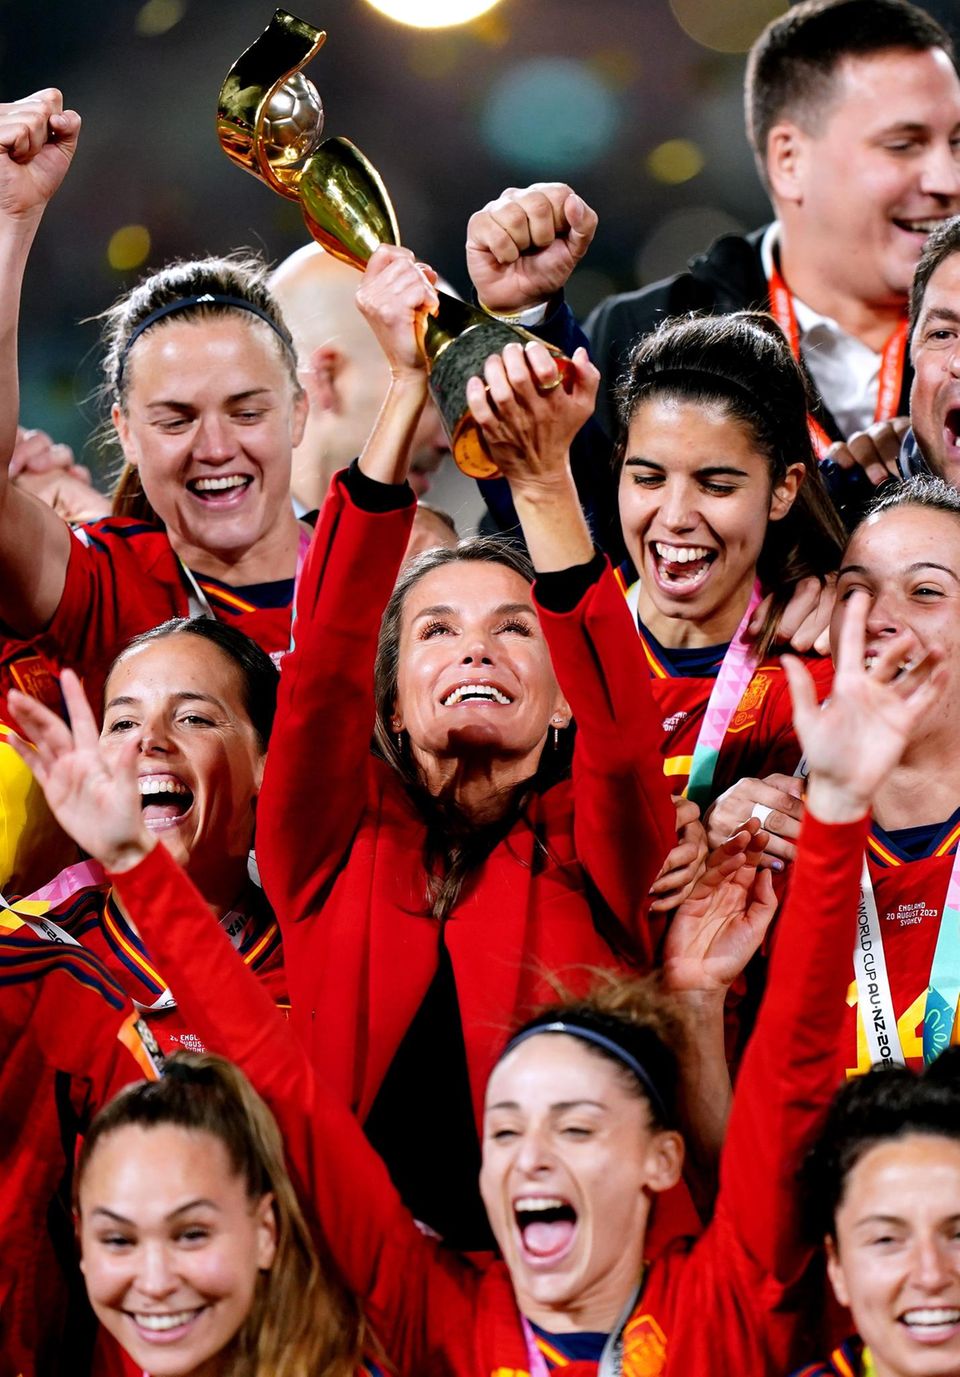 The Queen was extremely happy when the Spanish won